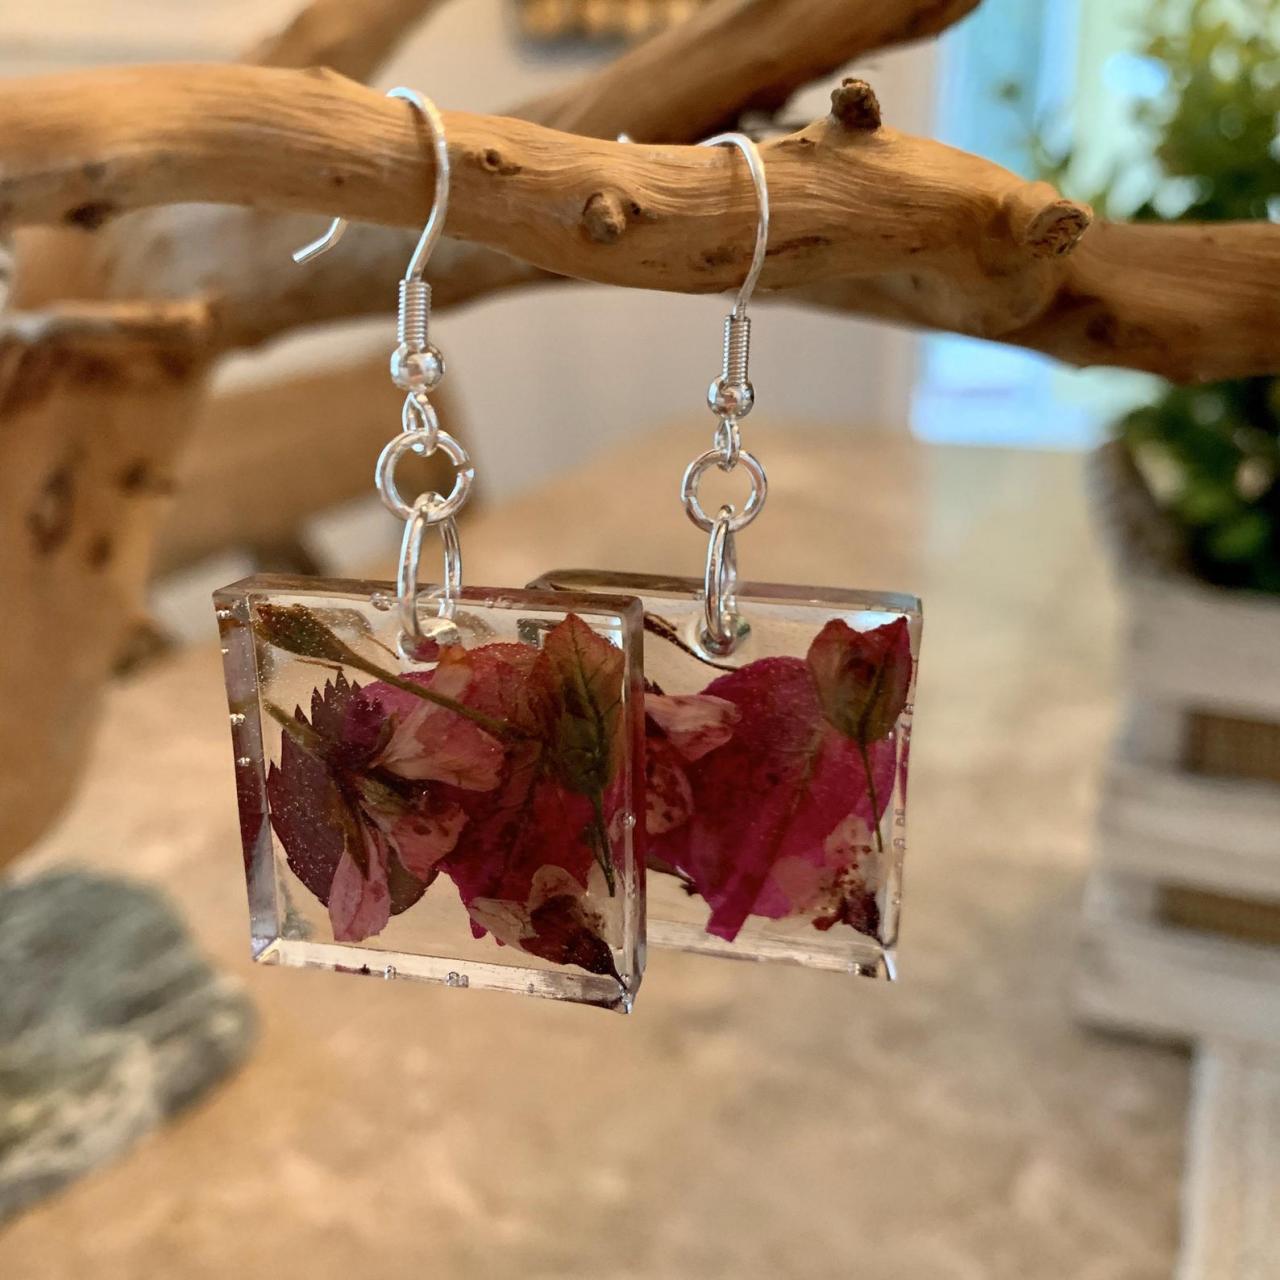 Resin Pressed Flowers Earrings, Real Flower Jewelry, Unique Gift For Grad,preserved Flowers, Boho, Minimalist Jewelry Gifts, Nature Gift, Botanic